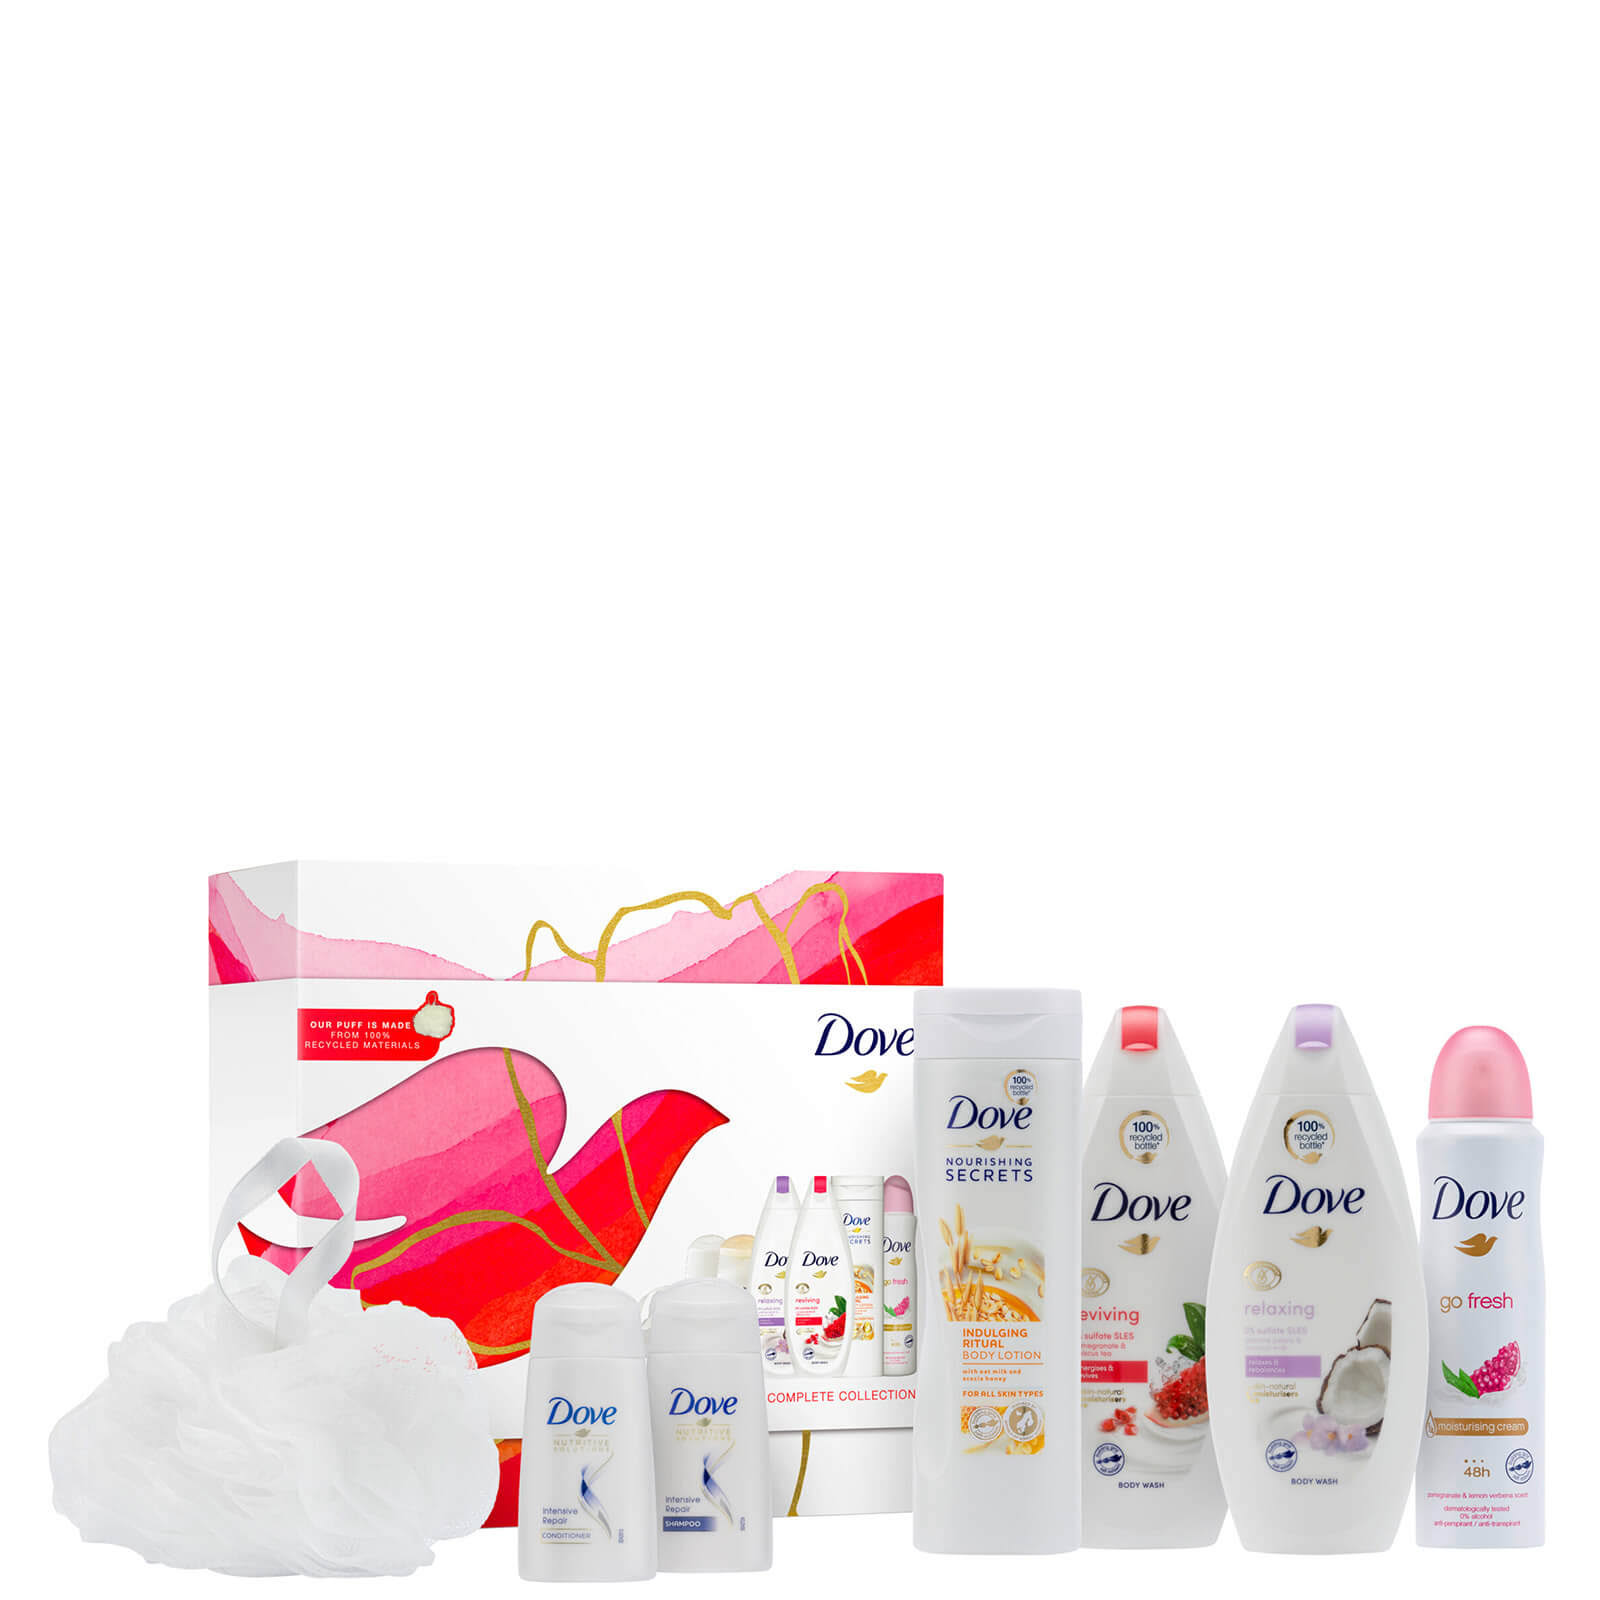 Dove Radiantly Refreshing Complete Collection